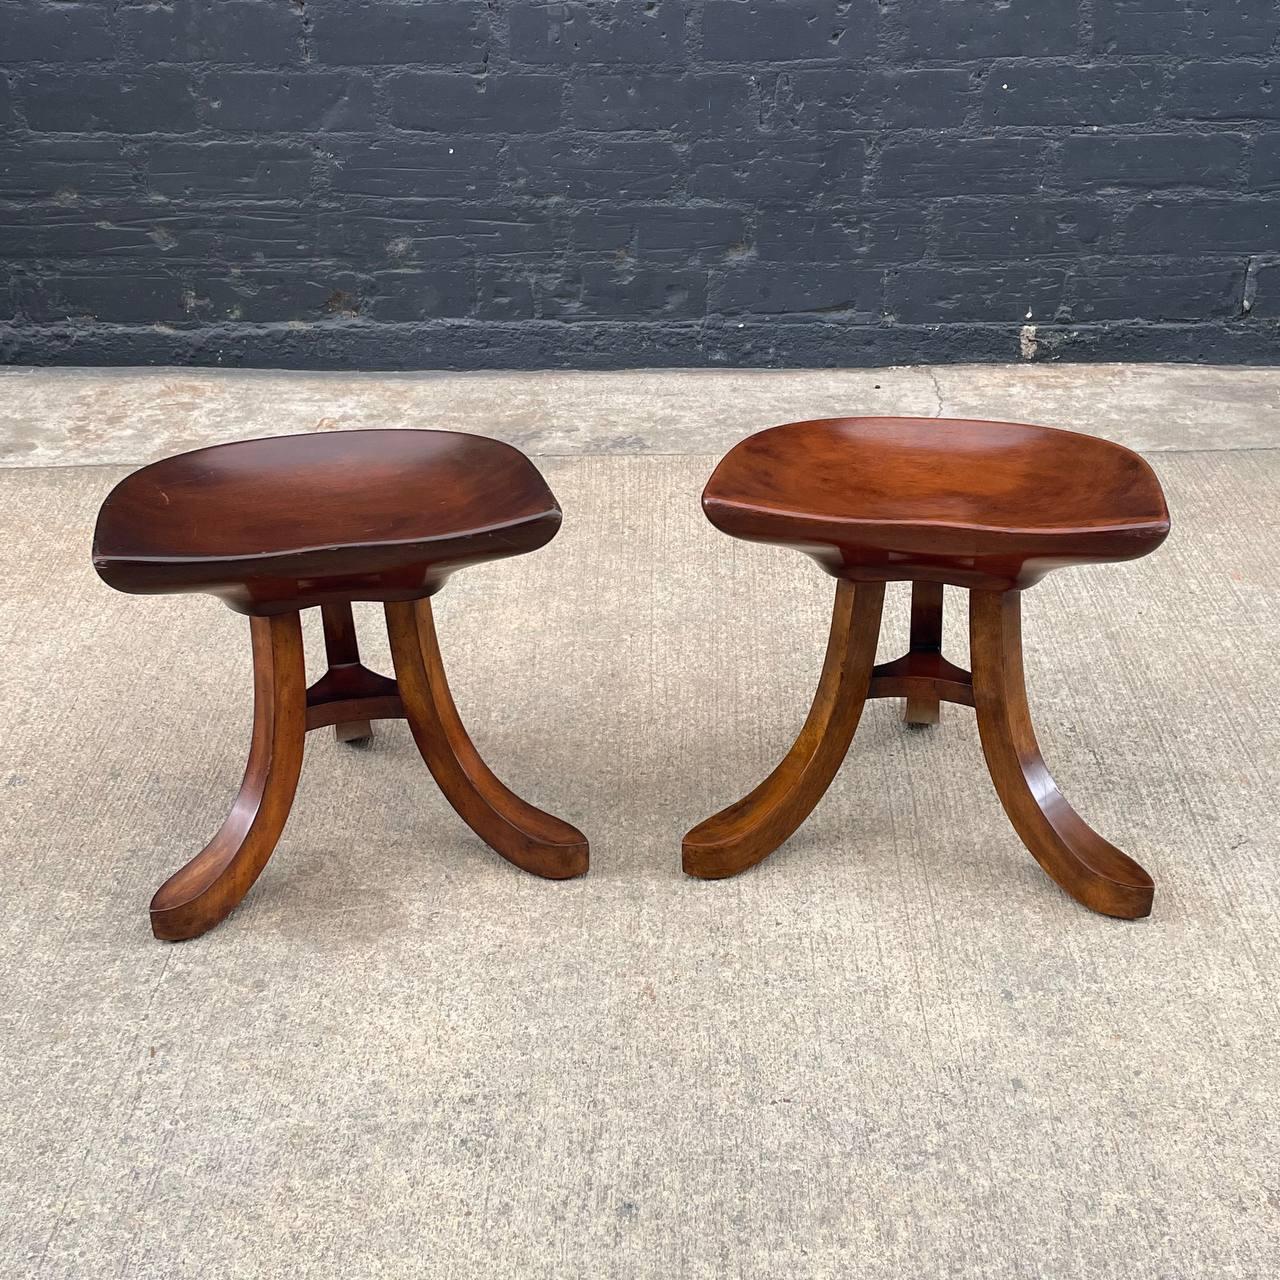 American Pair of Vintage Sculpted Mahogany Tripod Stools by Smith & Watson For Sale